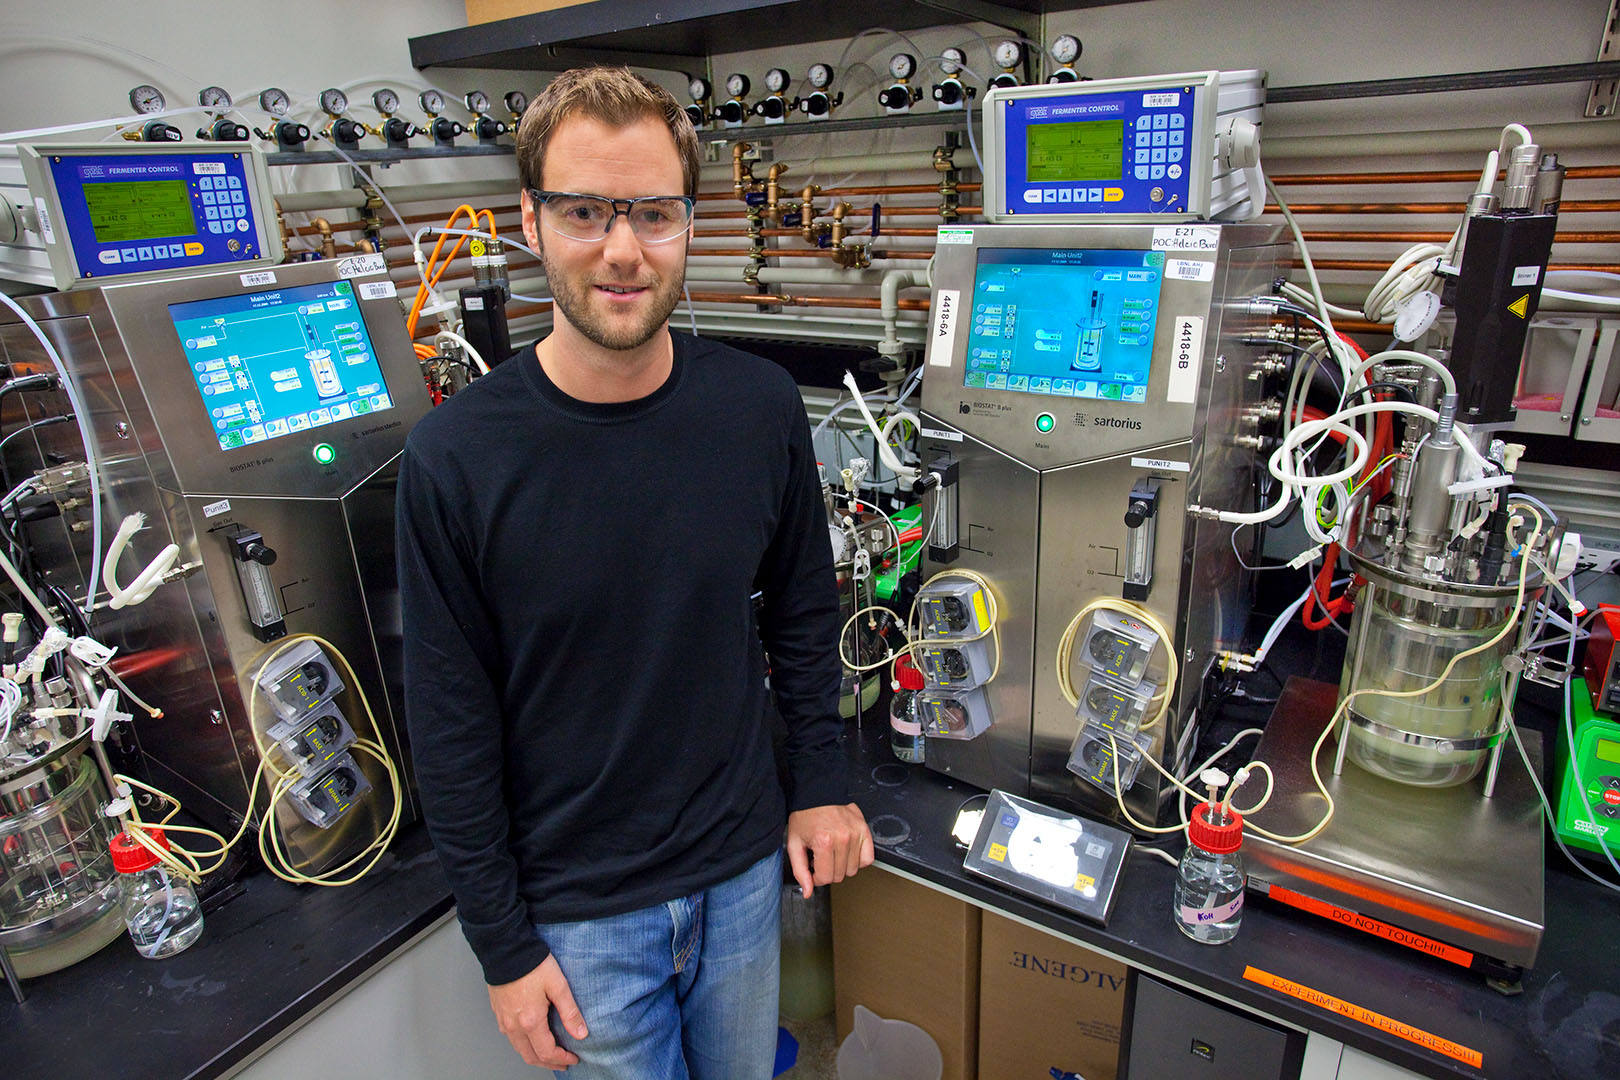 Person in black shirt and jeans standing in front of various machines